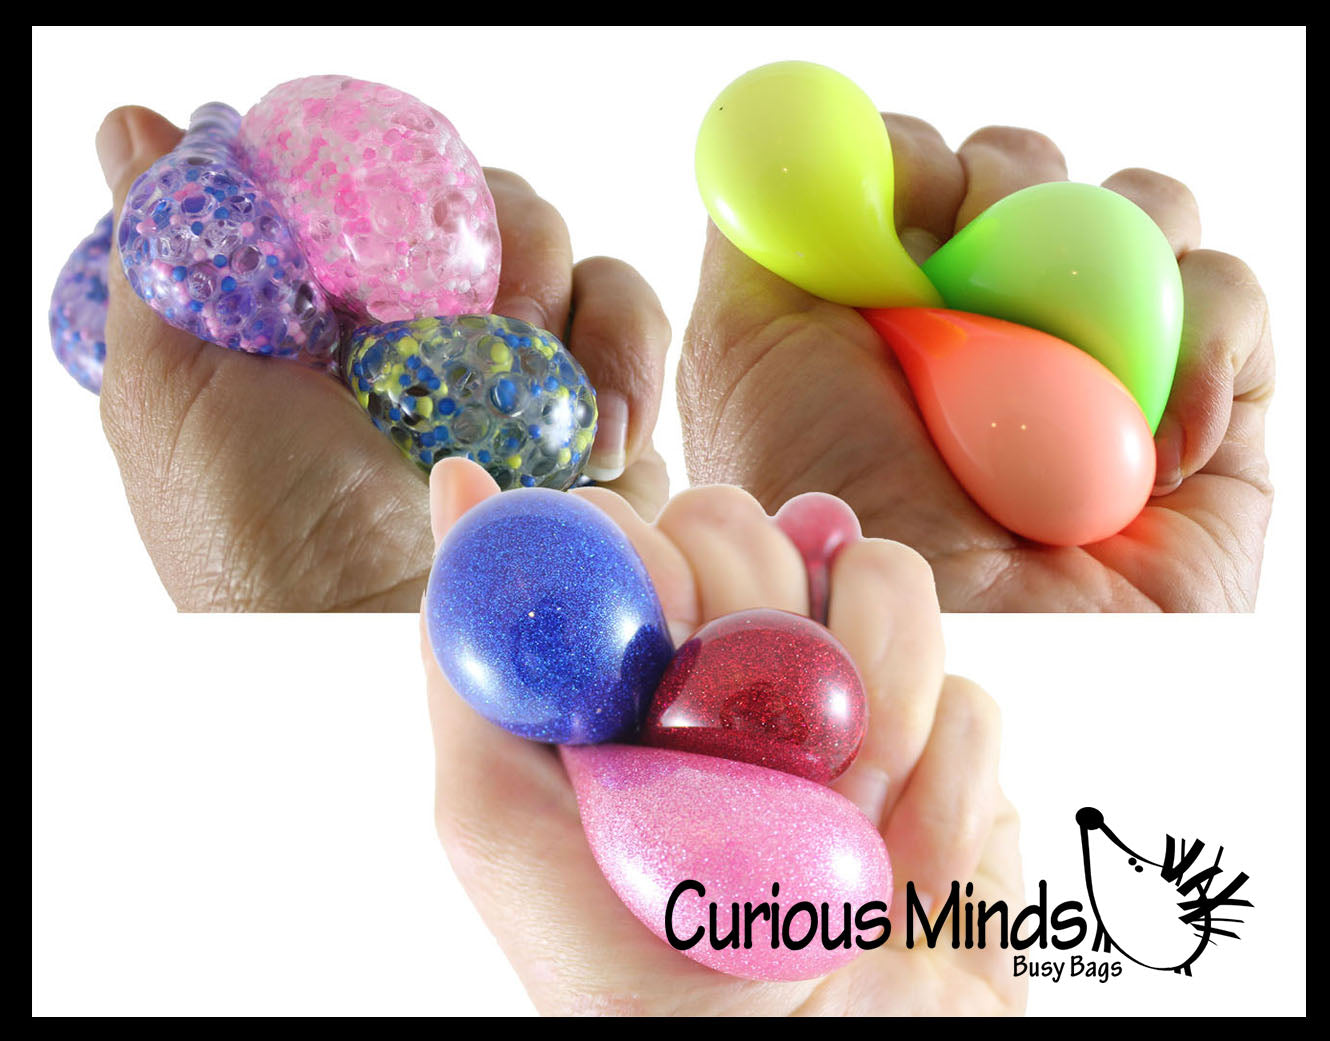 Set of 9 Mini Stress Balls - 3 Different Styles in 3 Packs - of Small Amazing 1.5"  Stress Ball - Ceiling Sticky Glob Balls - Squishy Gooey Shape-able Squish Sensory Squeeze Balls